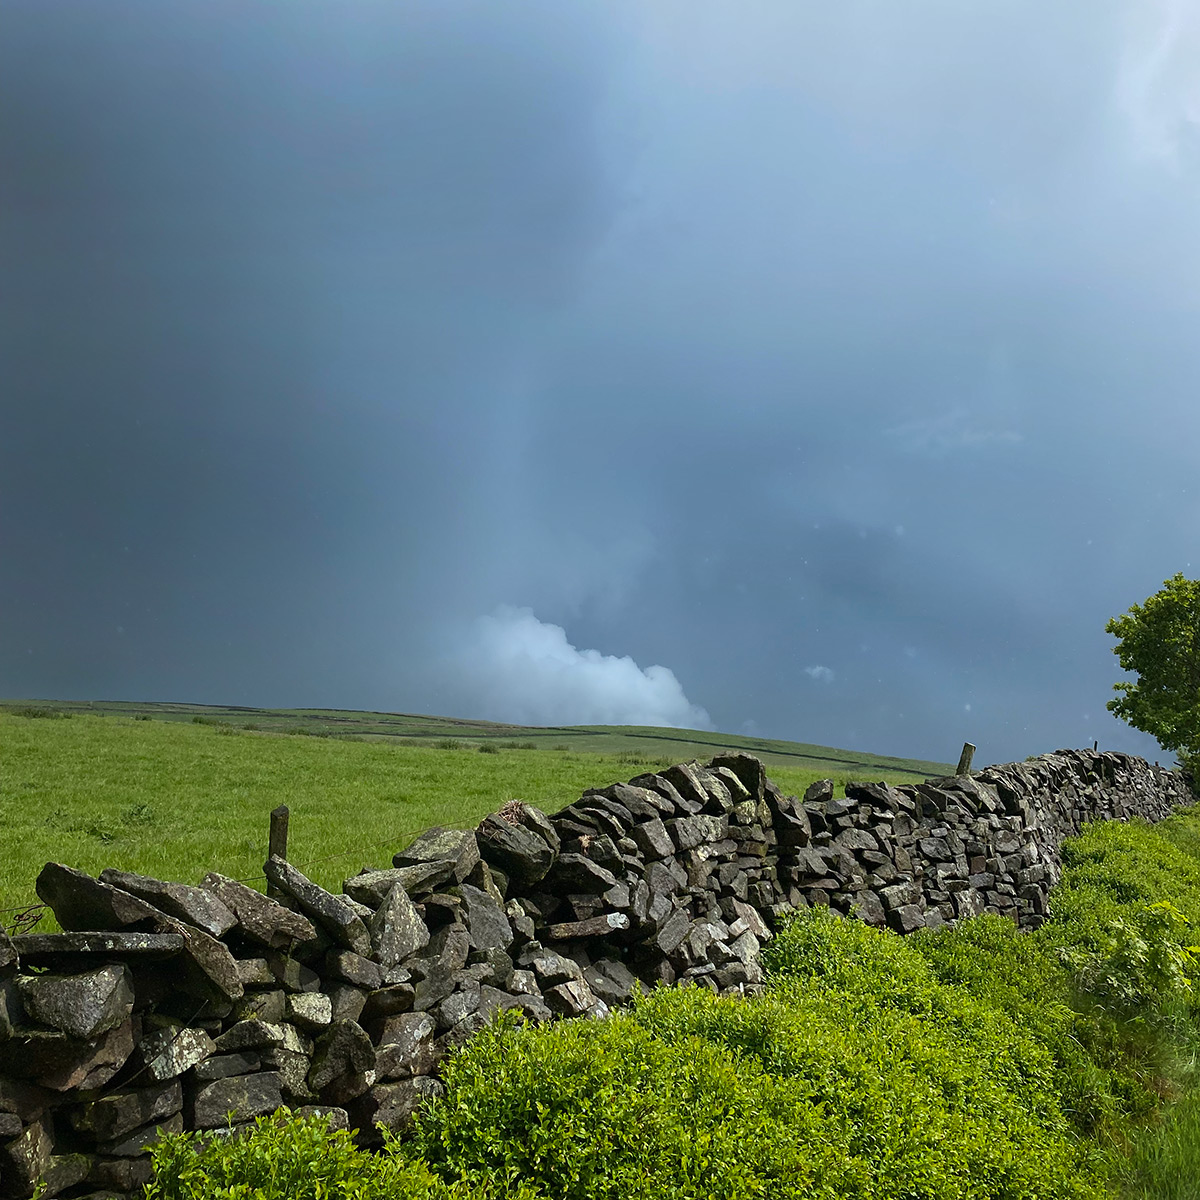 Oven Hill Cloudburst - Photo of dramatic clouds over Oven Hill in Birch Vale in the Peak District - photo by gavstretchy